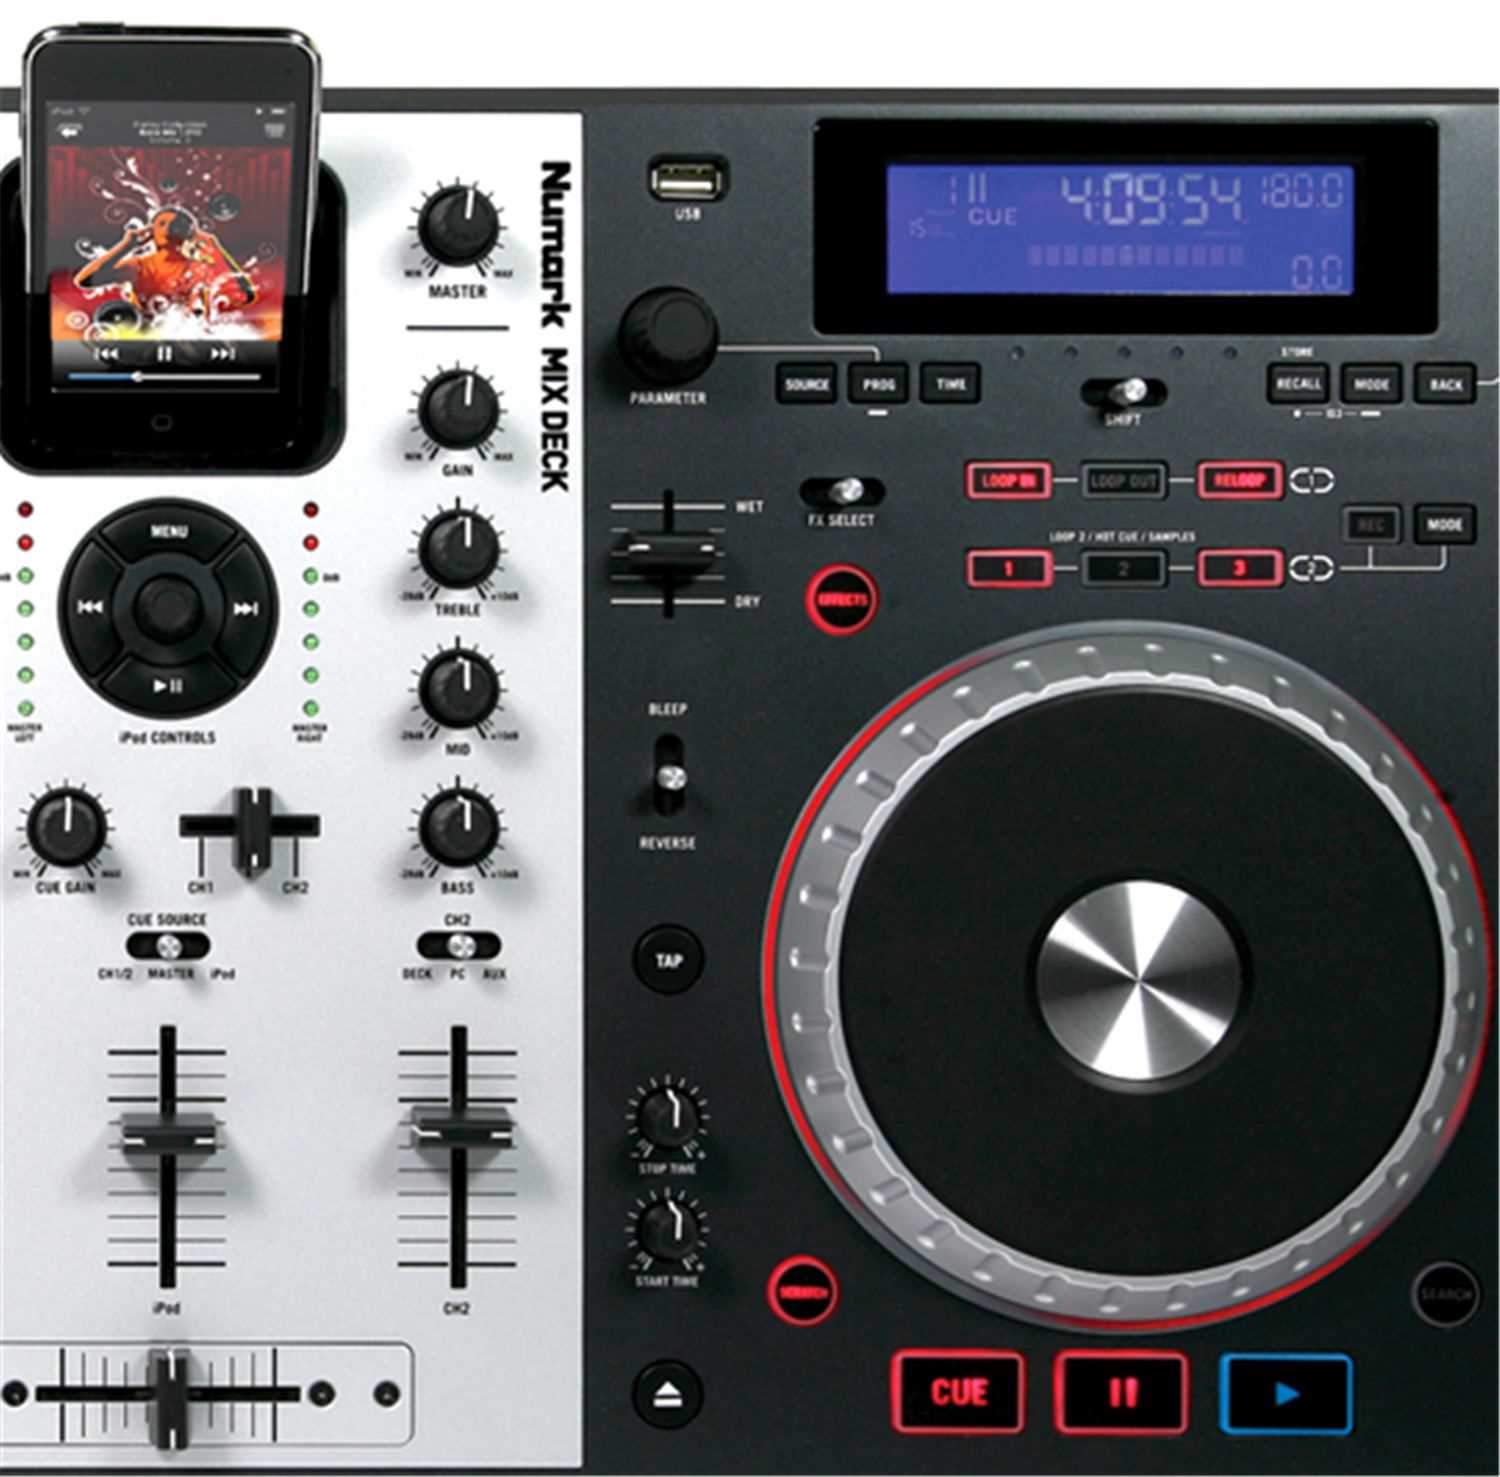 Numark MIXDECK CD/USB MIDI Controller Combo Player - PSSL ProSound and Stage Lighting